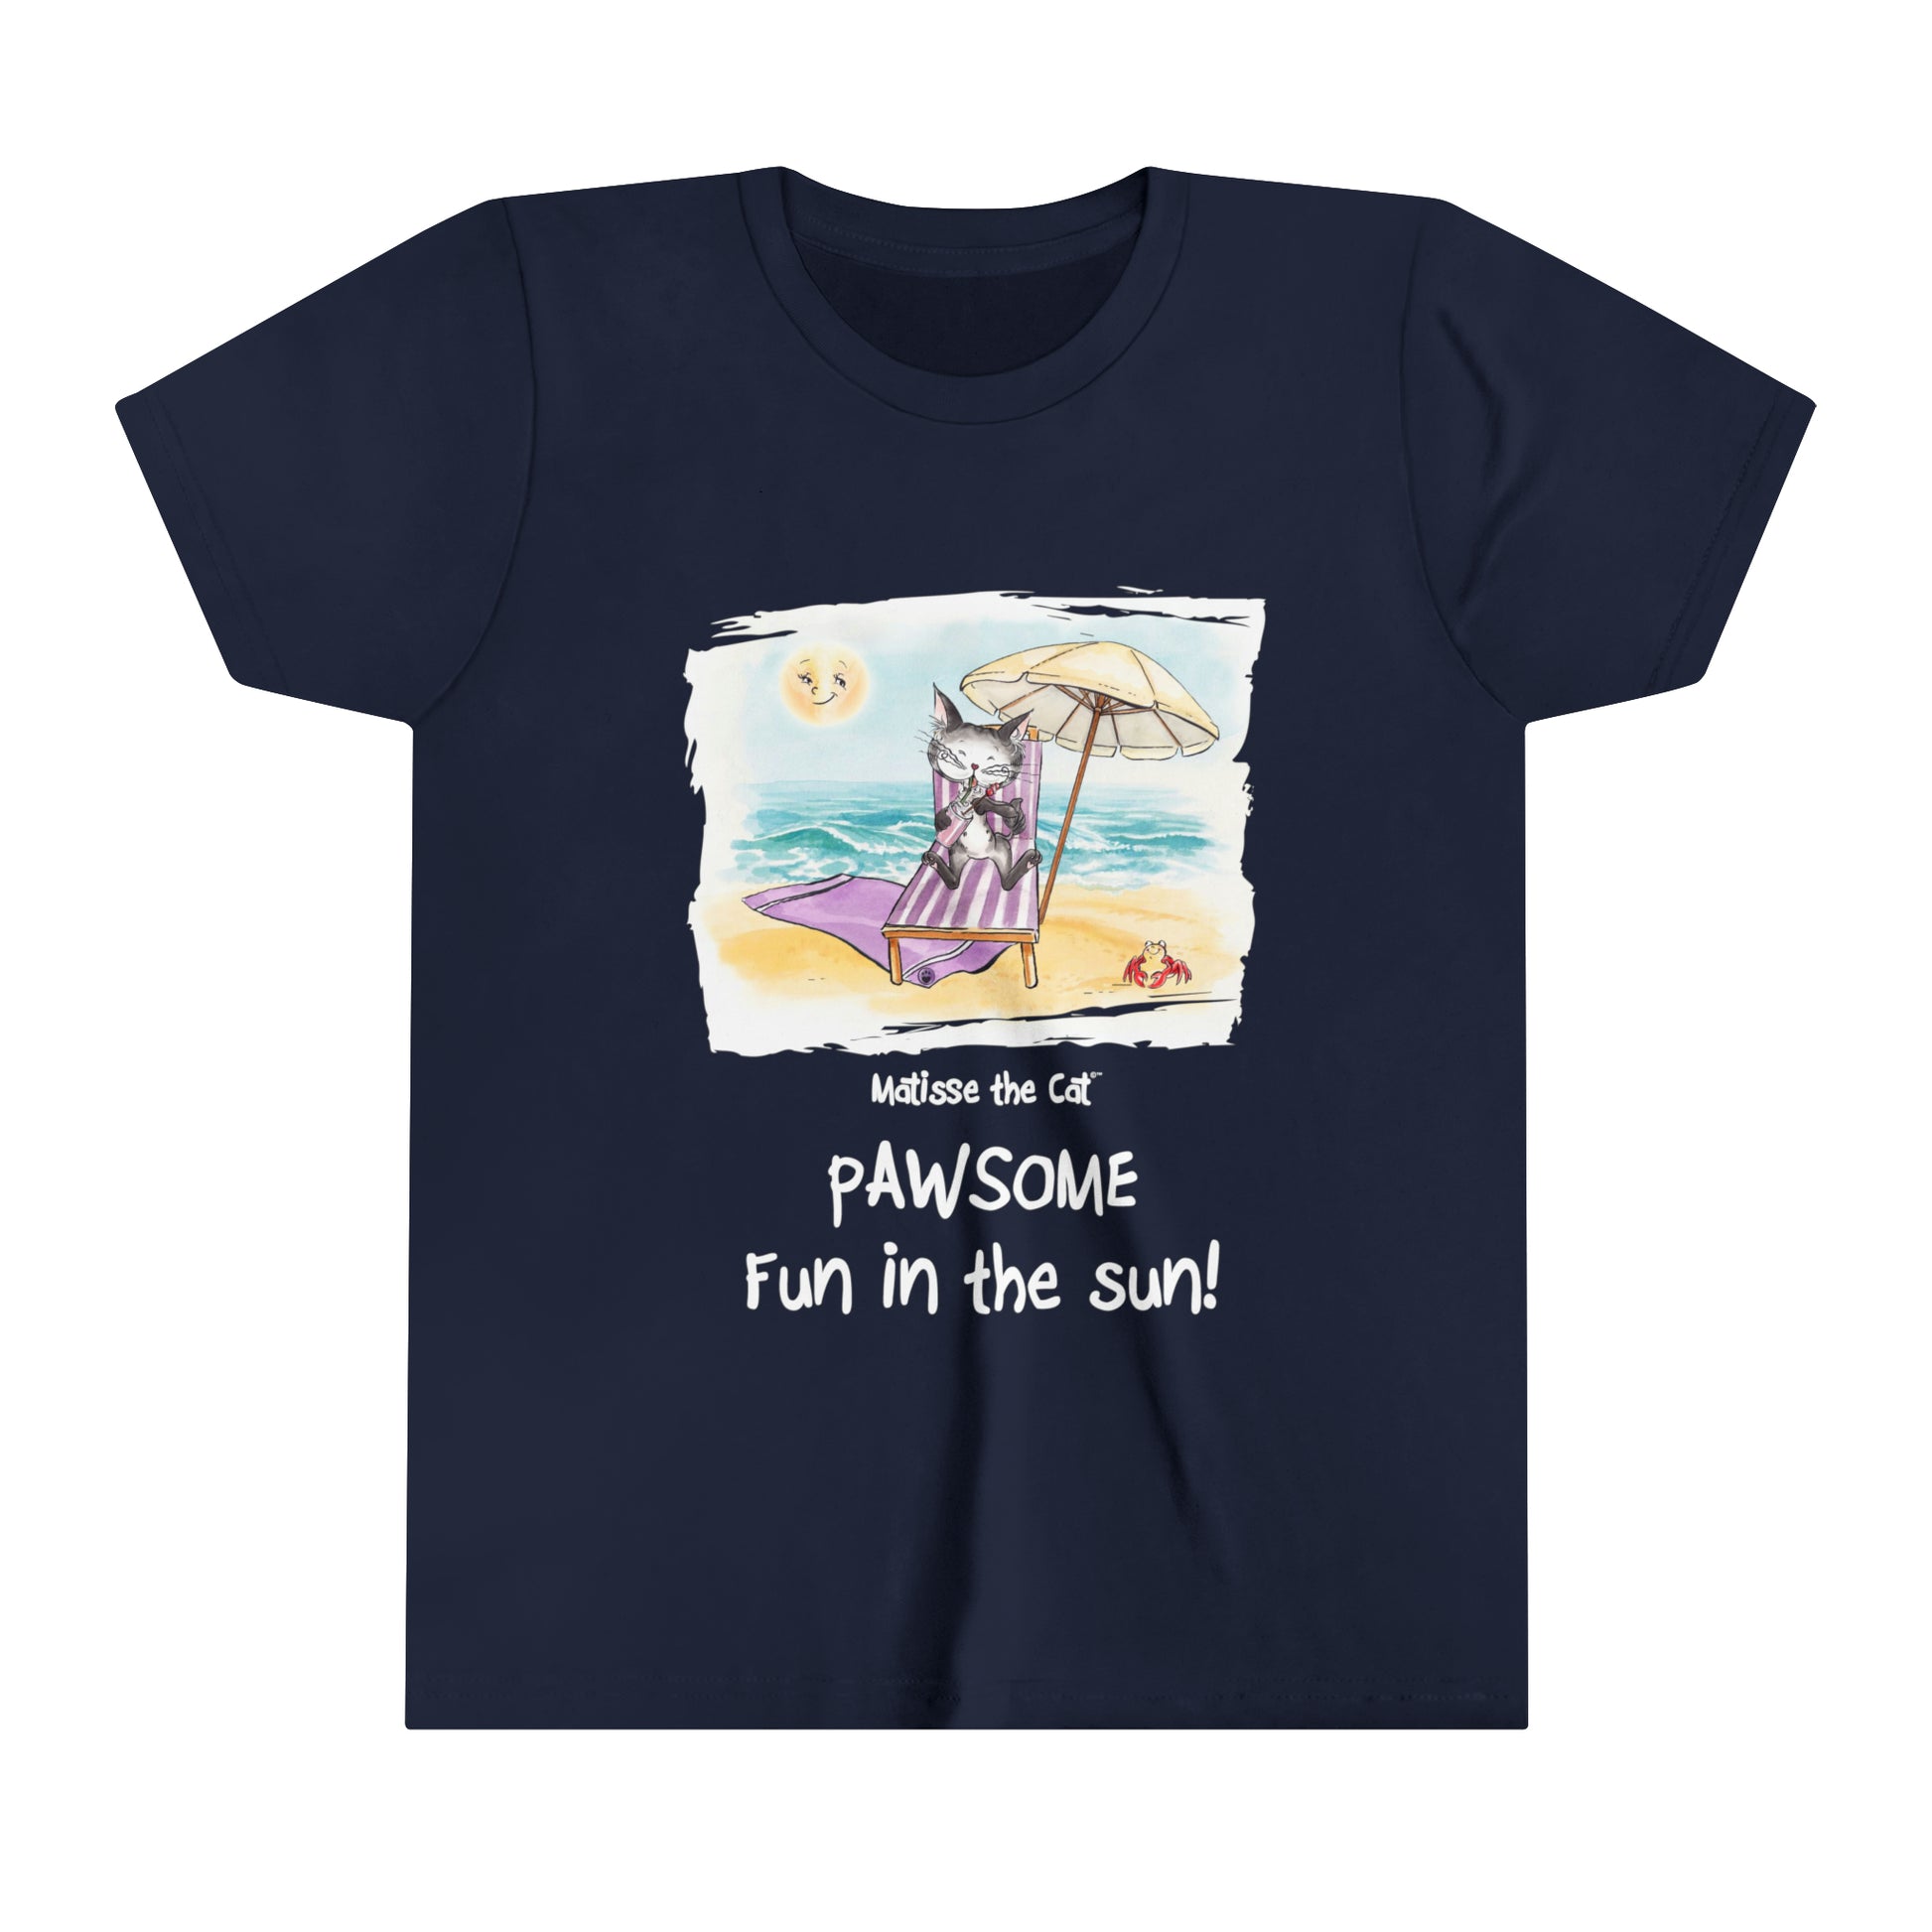 A navy blue official, Matisse the Cat children’s t-shirt with the slogan ‘Pawsome Fun in the Sun ‘ showcases Matisse at the beach, relaxing on a sun lounger sipping a mile shake.